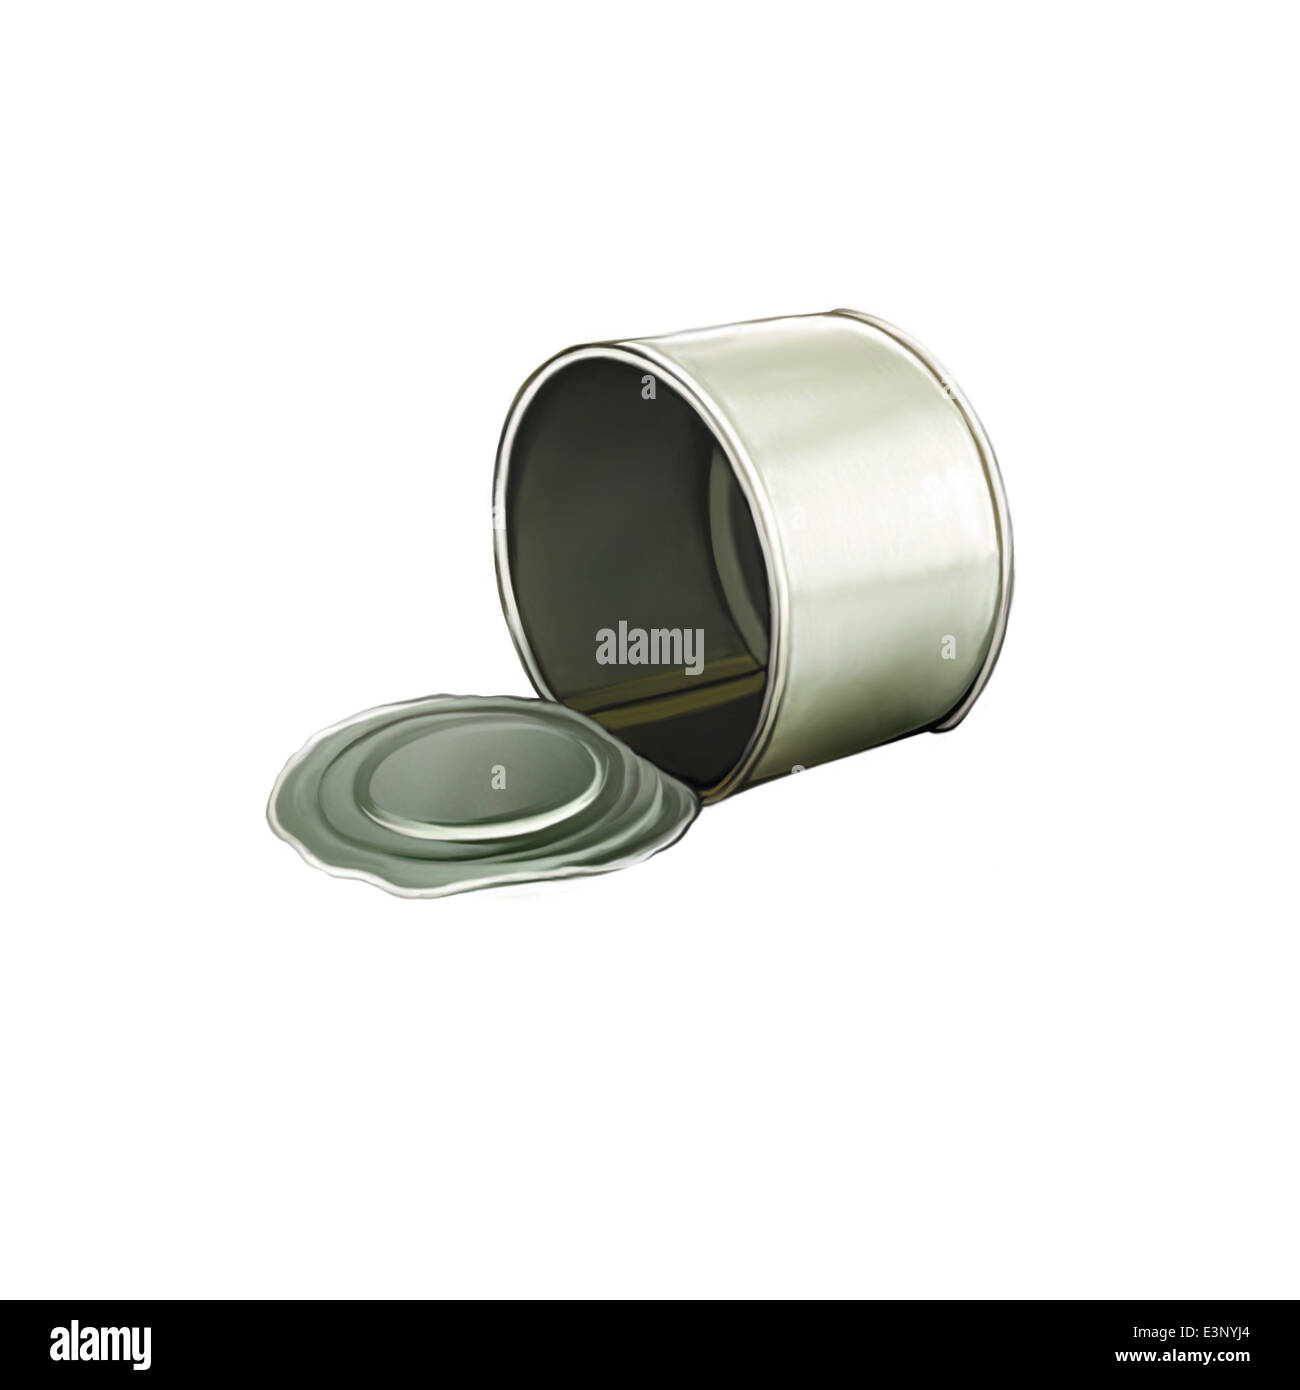 Opened Tincan Ribbed Metal Tin Can, Canned Food Stock Photo